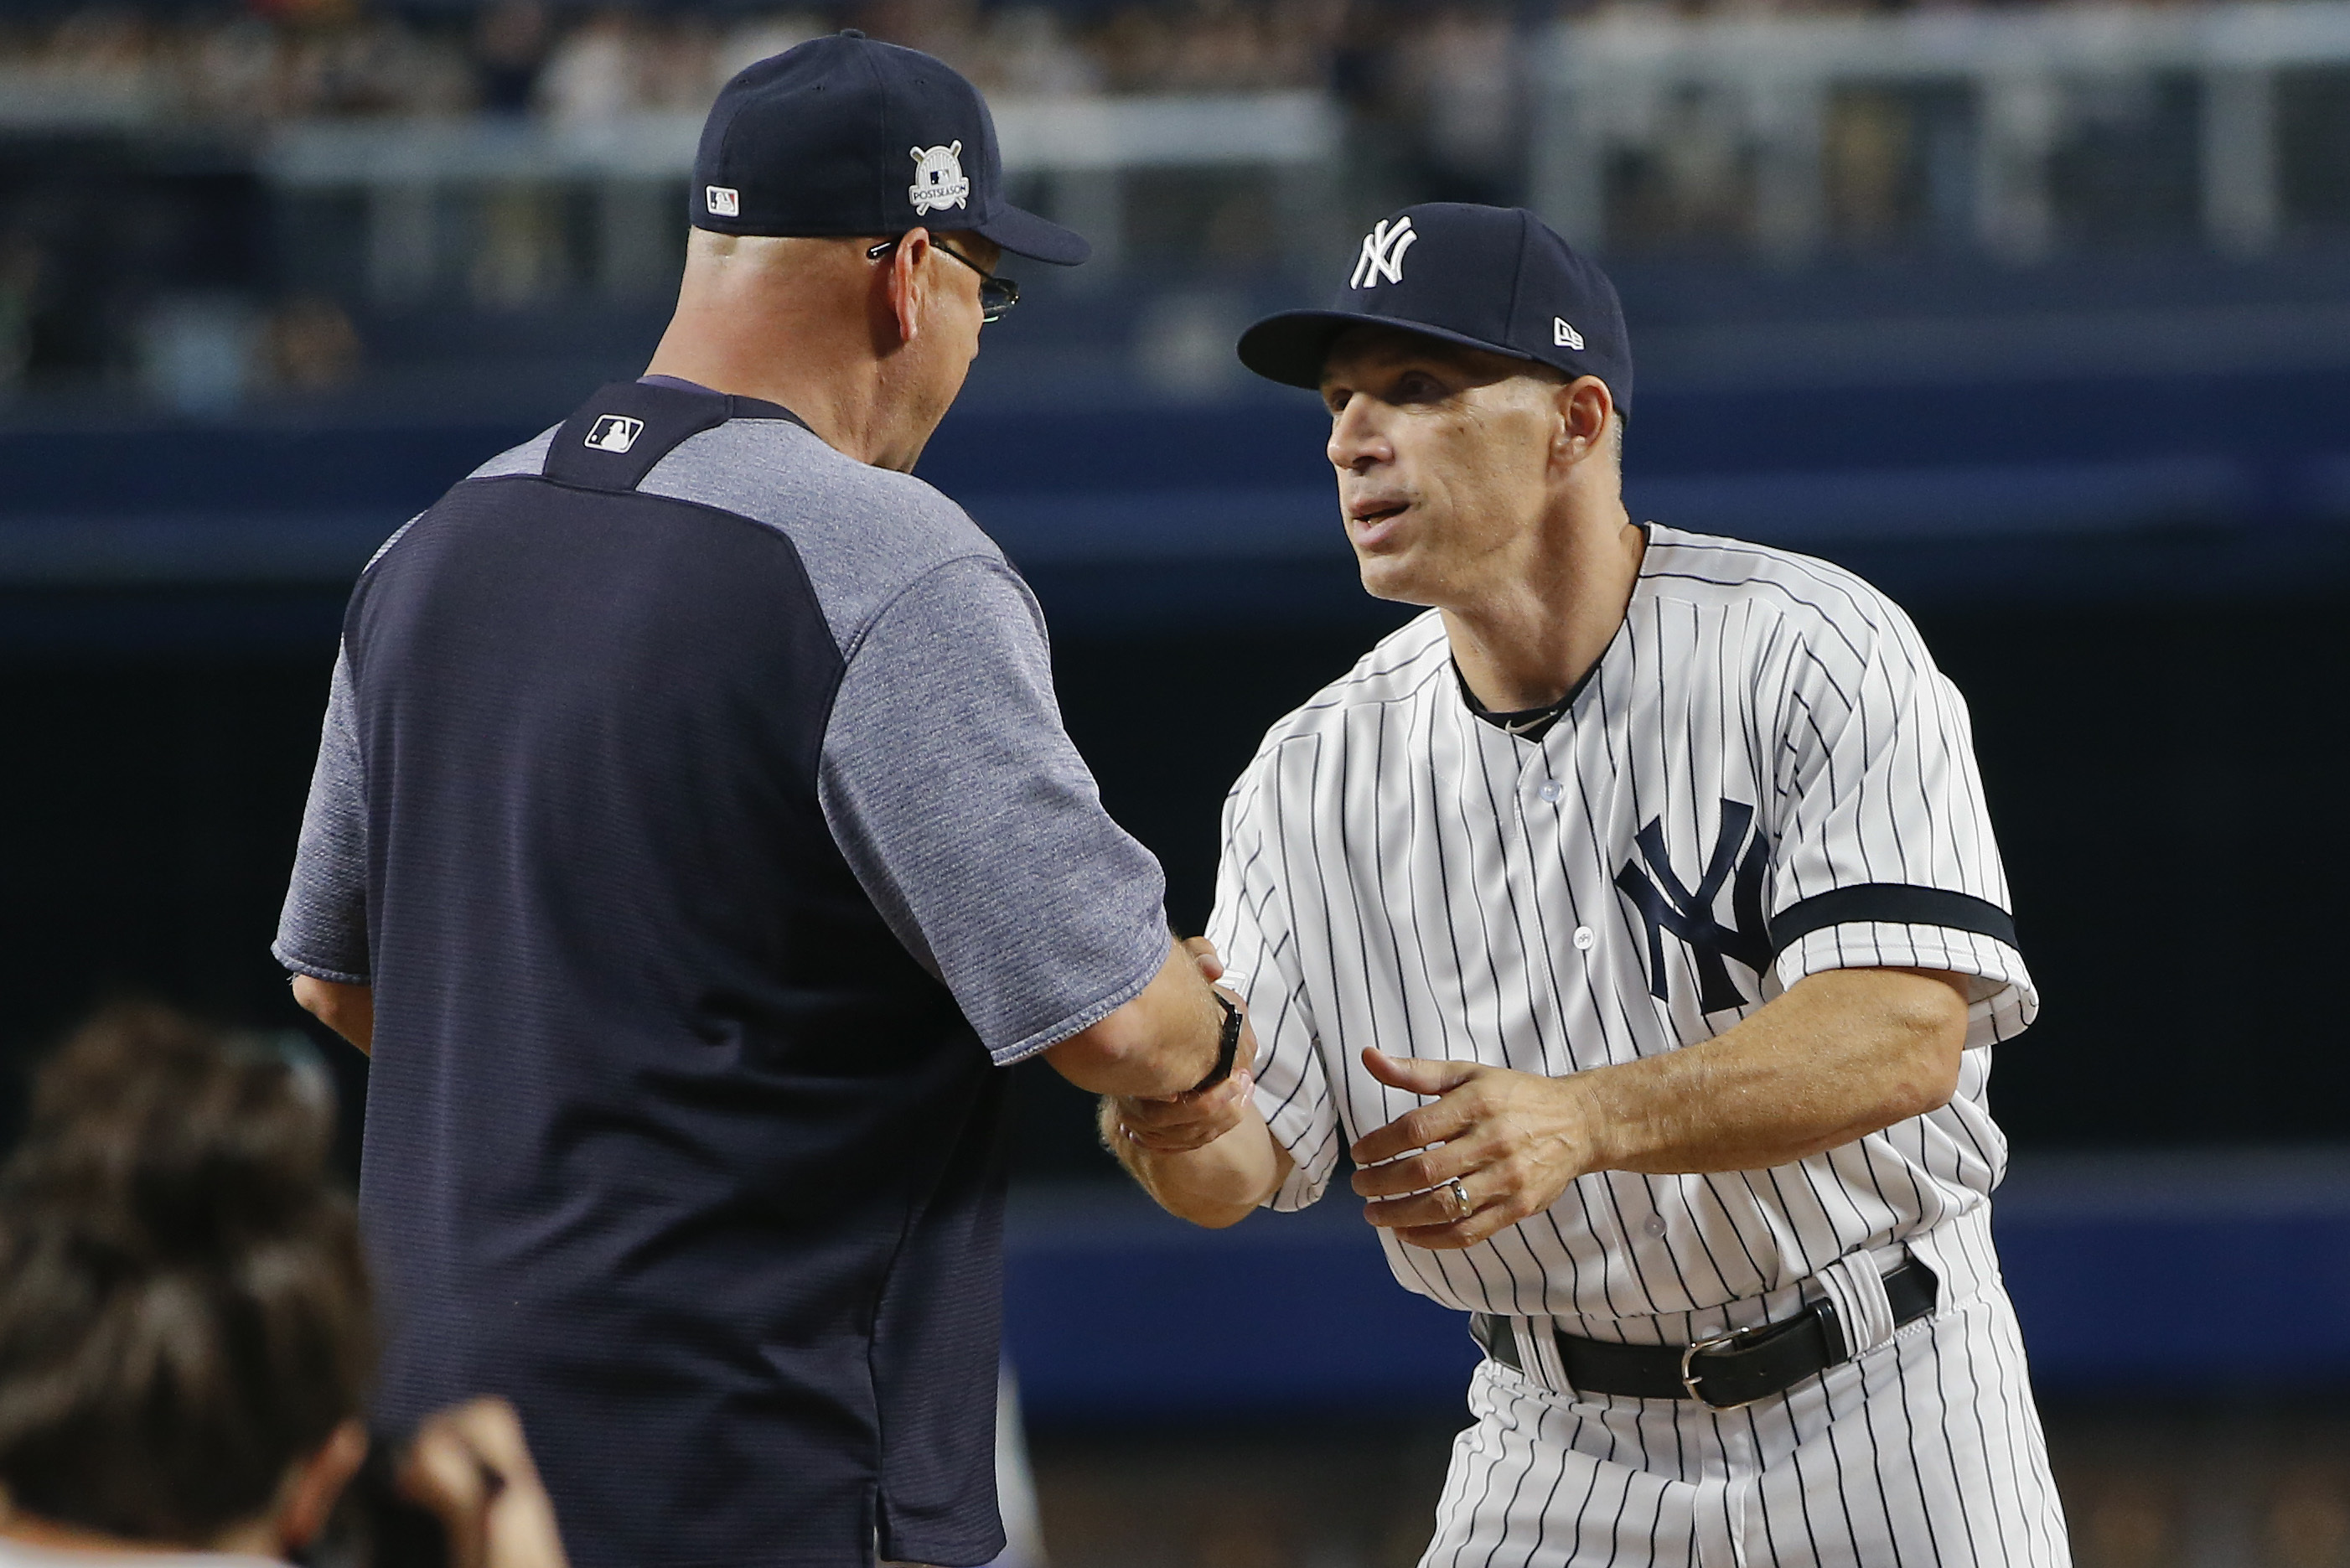 New York Yankees manager Joe Girardi reminisces about time in Iowa